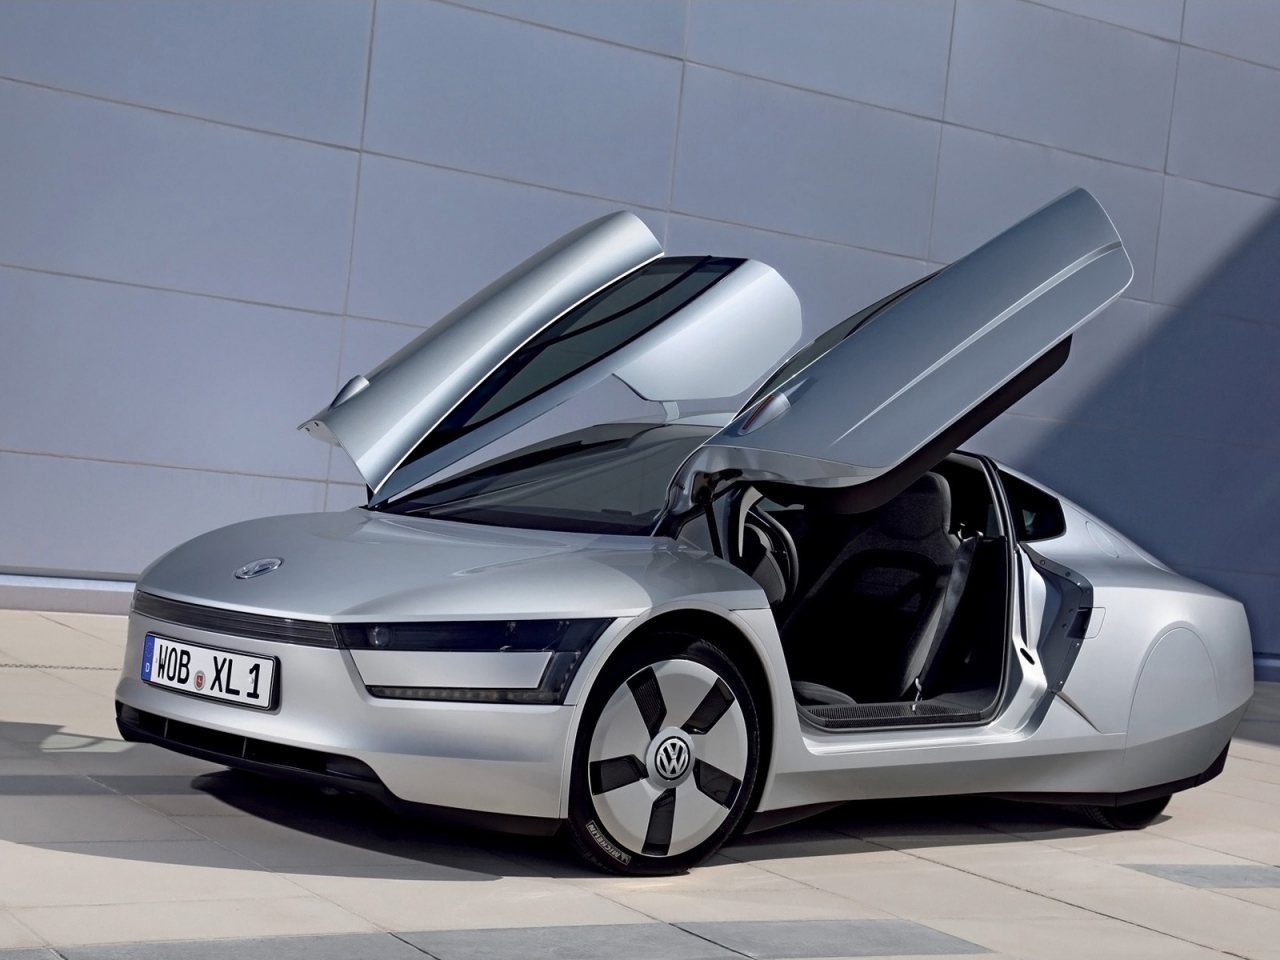 VW XL1 for 1280 x 960 resolution